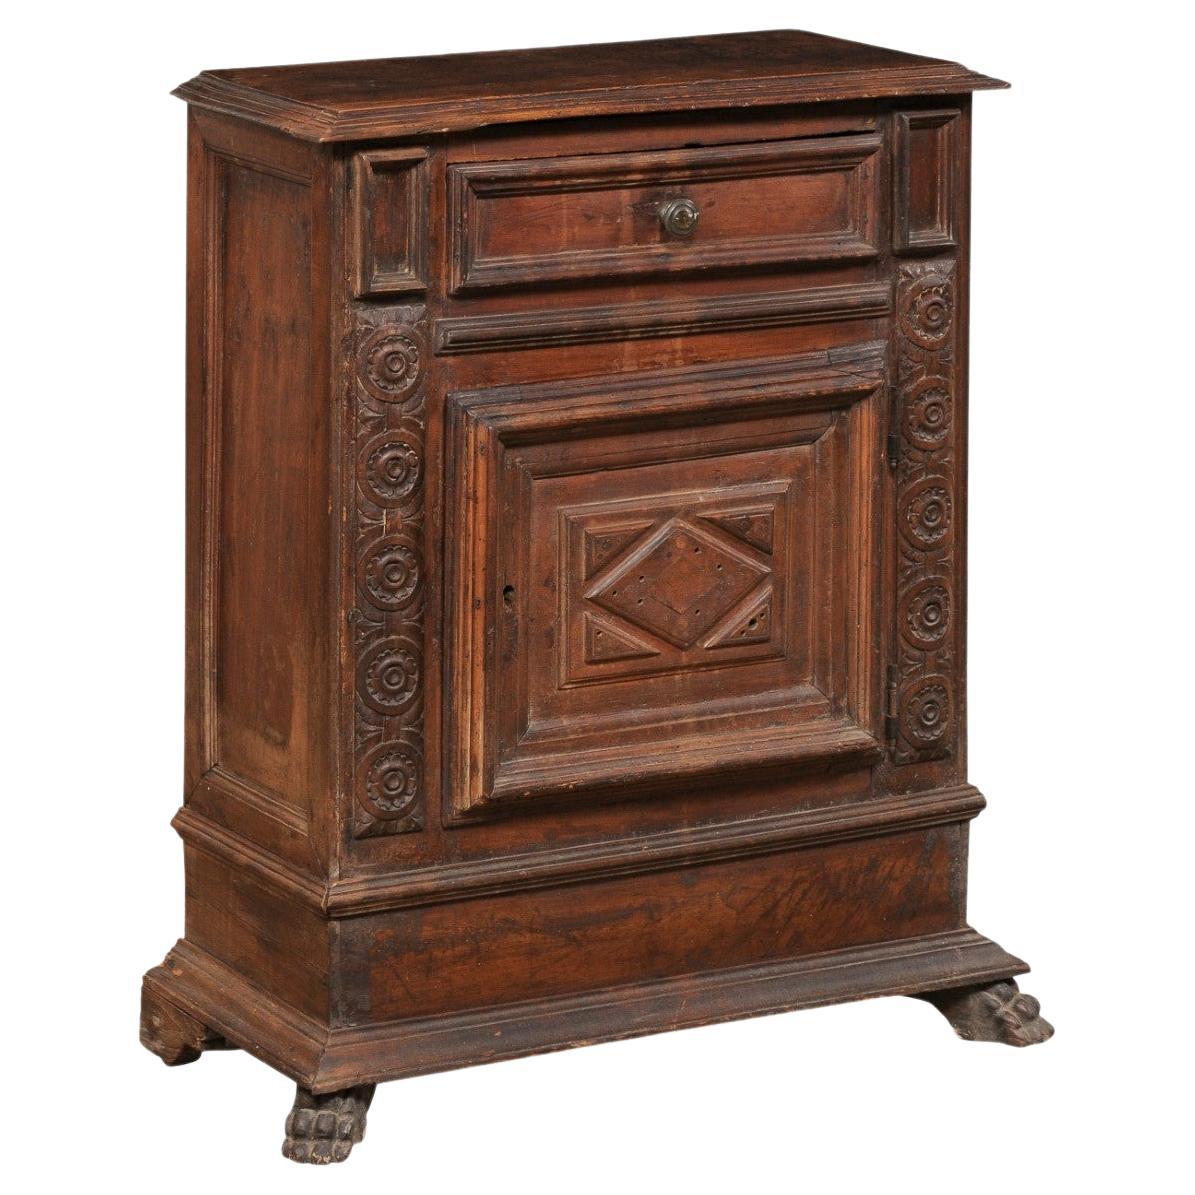 Italian Small-Sized Carved Walnut Cabinet on Paw Feet, Turn of 17th & 18th C.